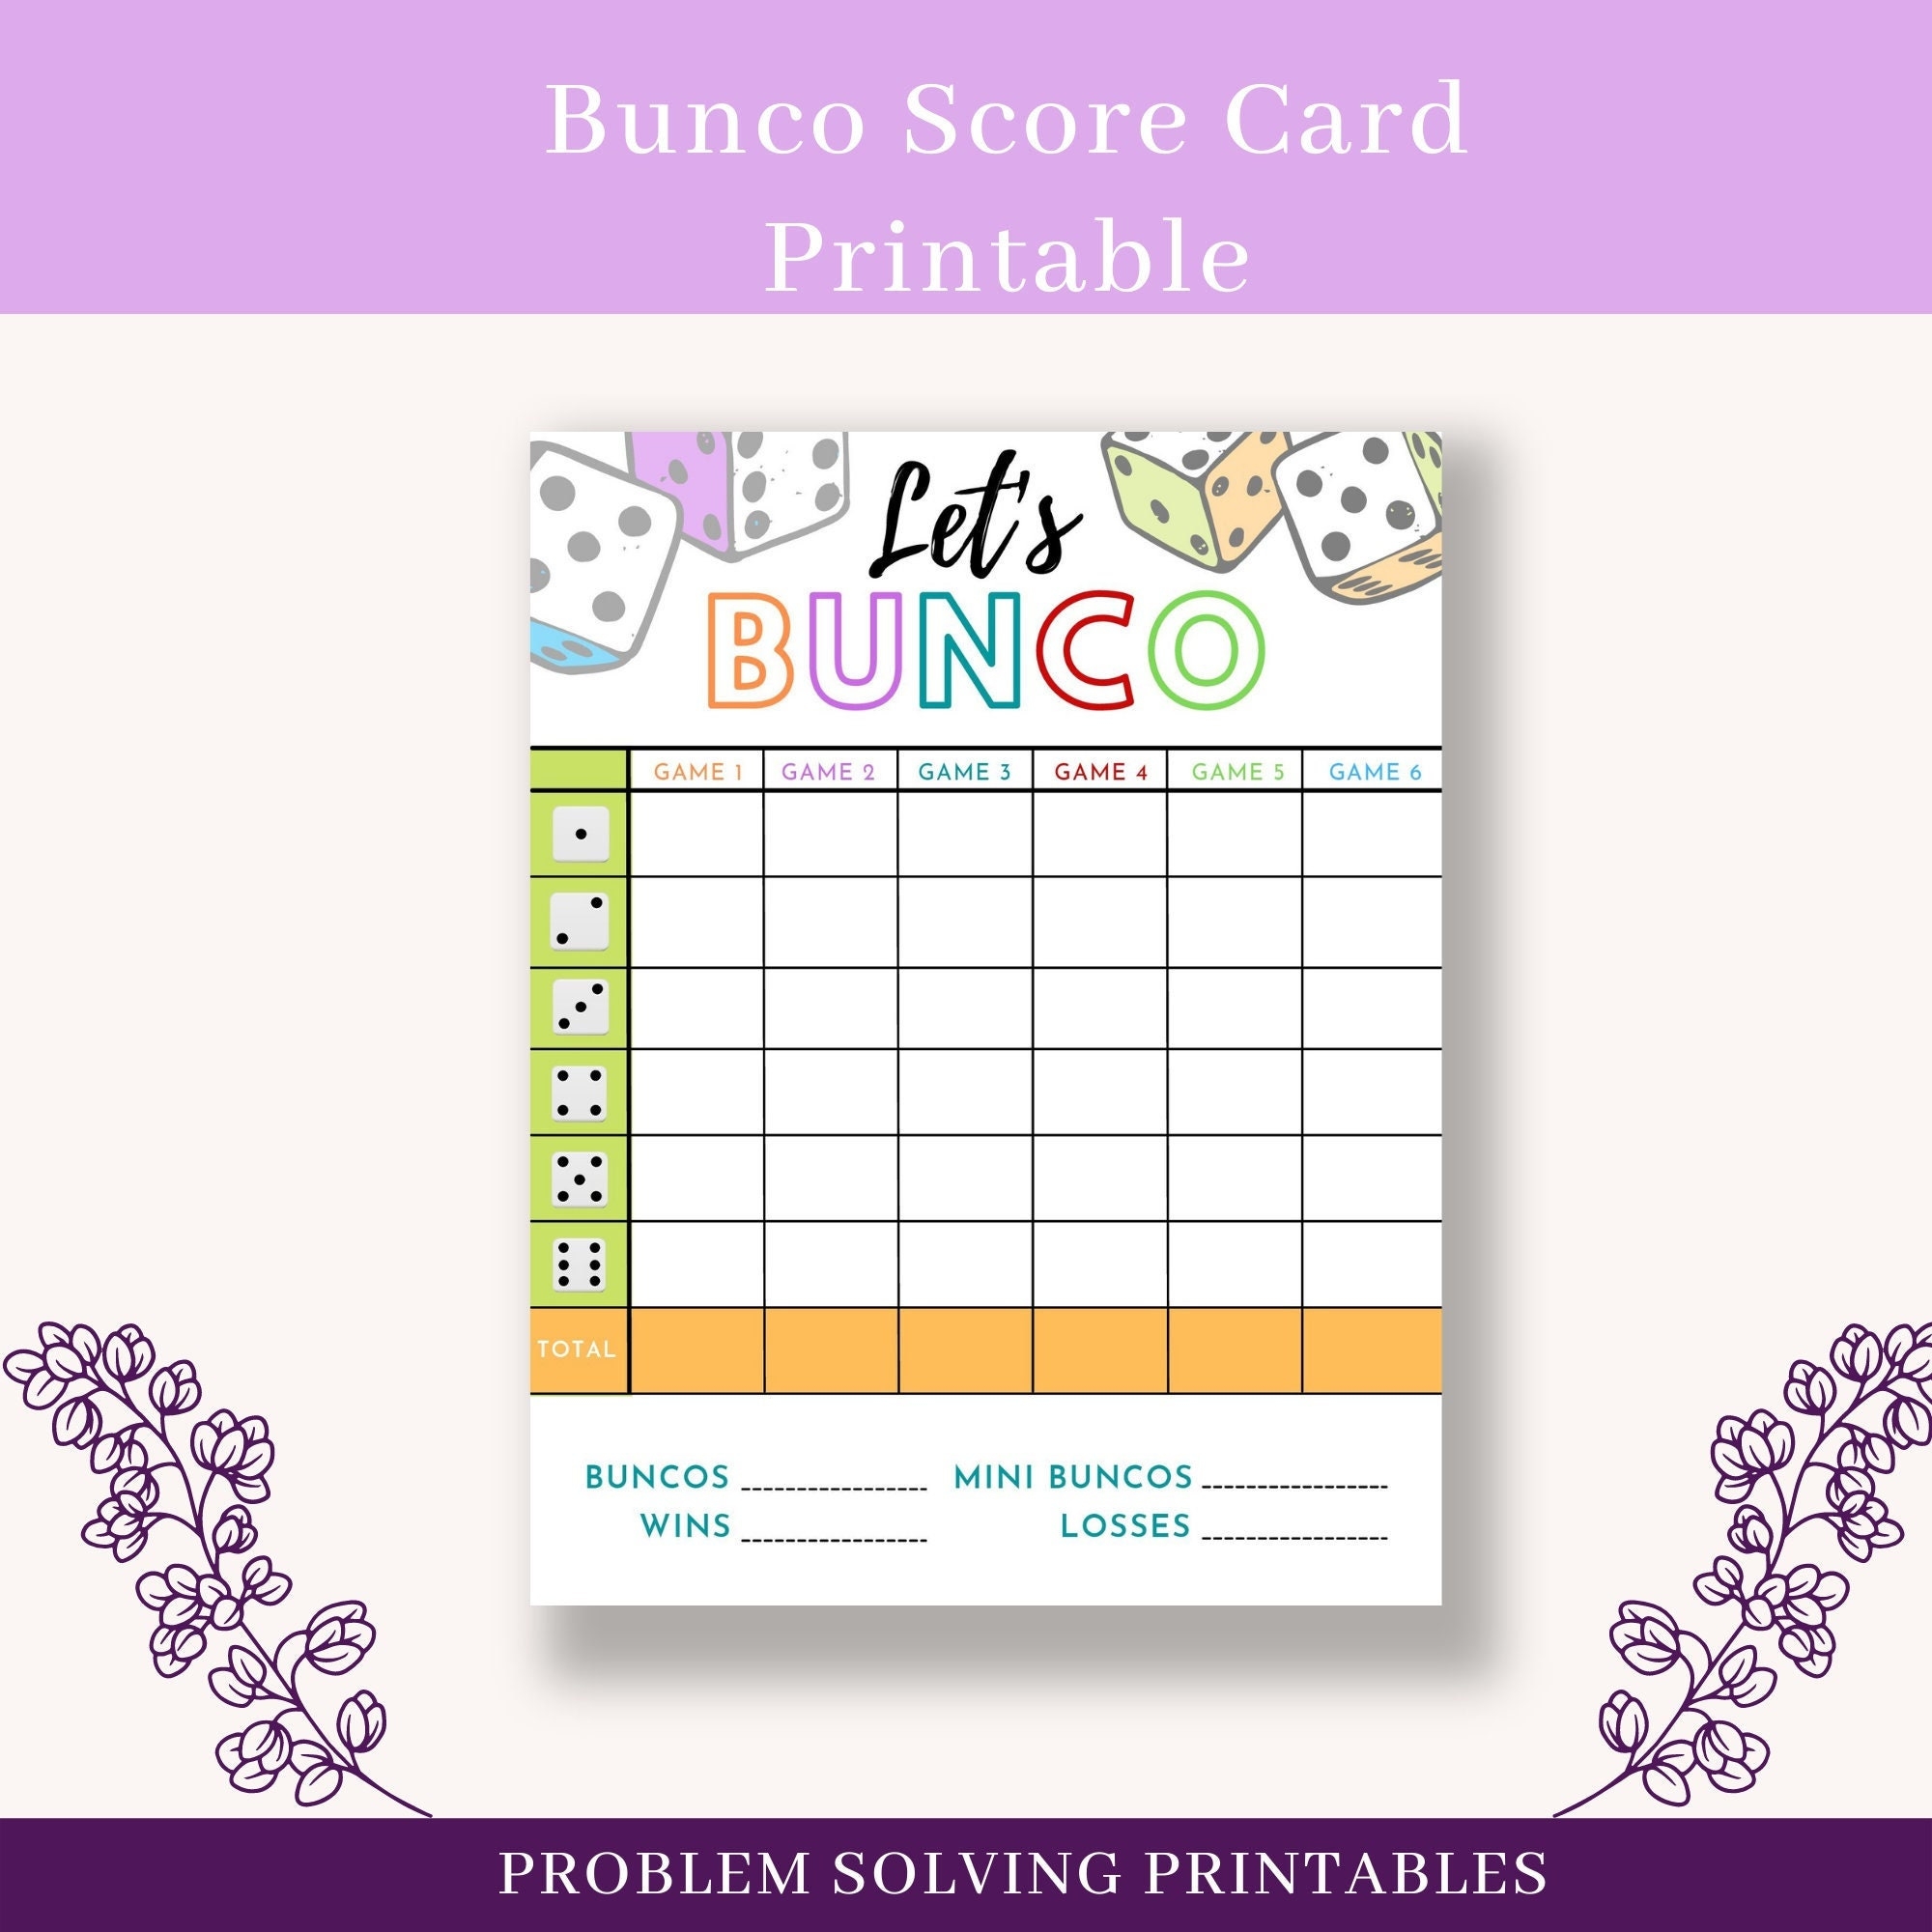 Bunco Score Card Sheets Pad Printable Bunko Score Card Bunco Dice Game Party Night Score Sheet Printables Immediate Download Kids Games Etsy